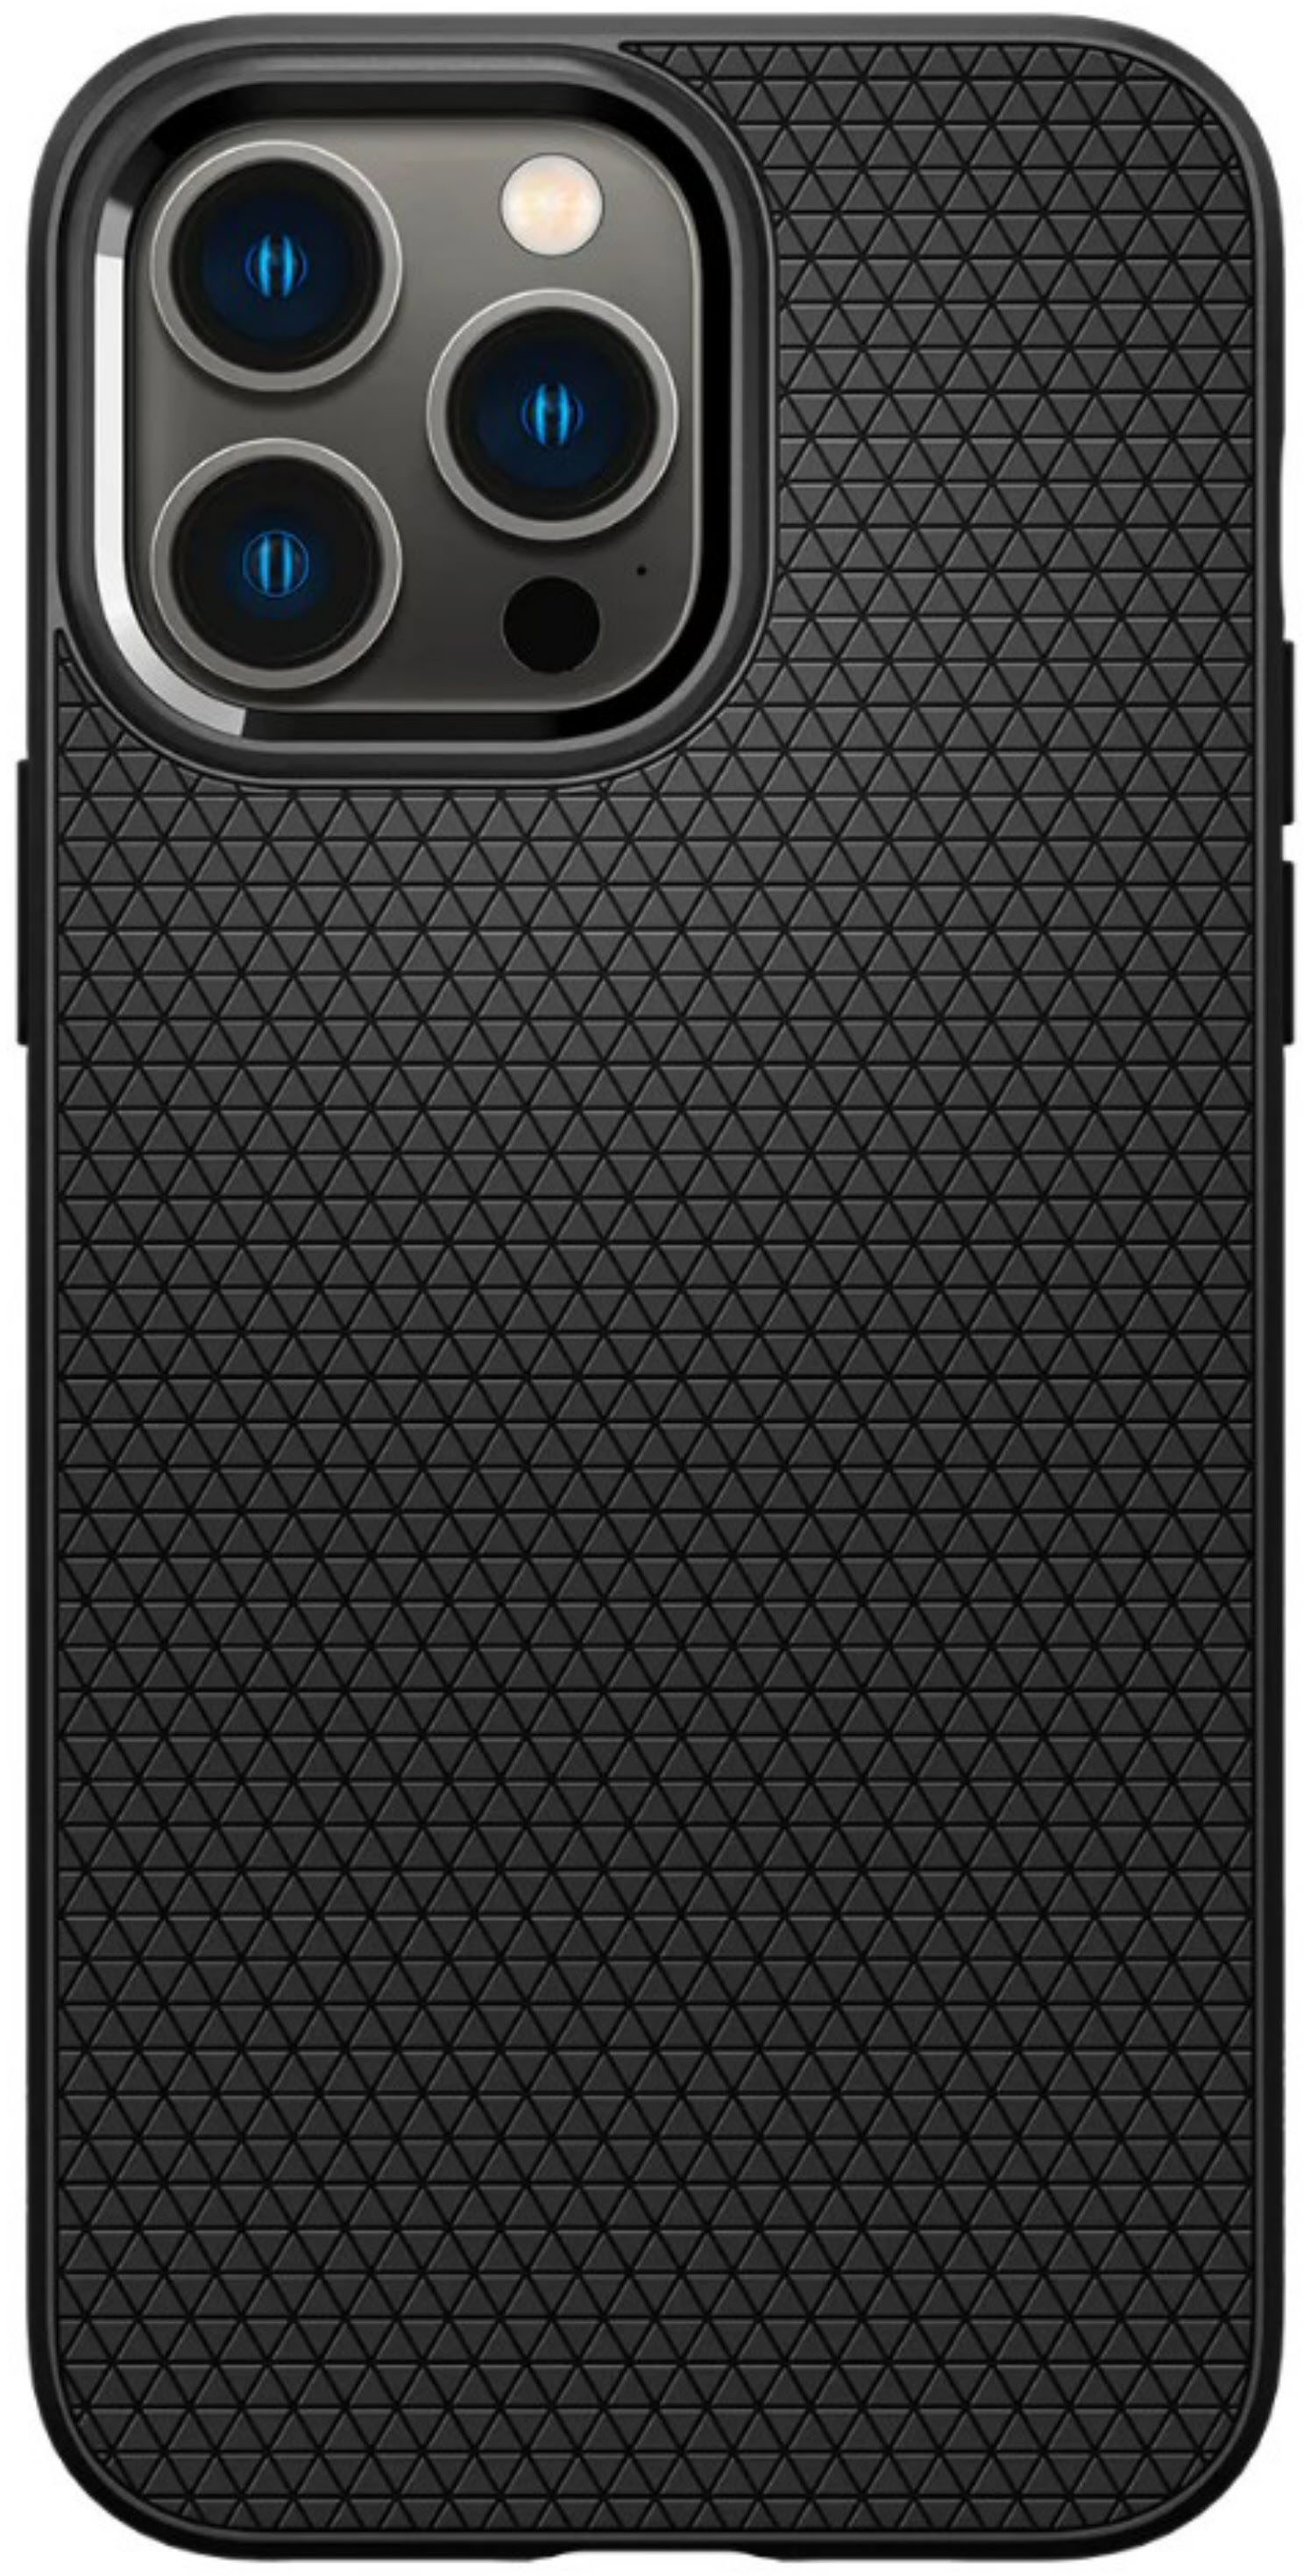 Spigen - Which one will you cop for the iPhone 14 Pro/Pro Max